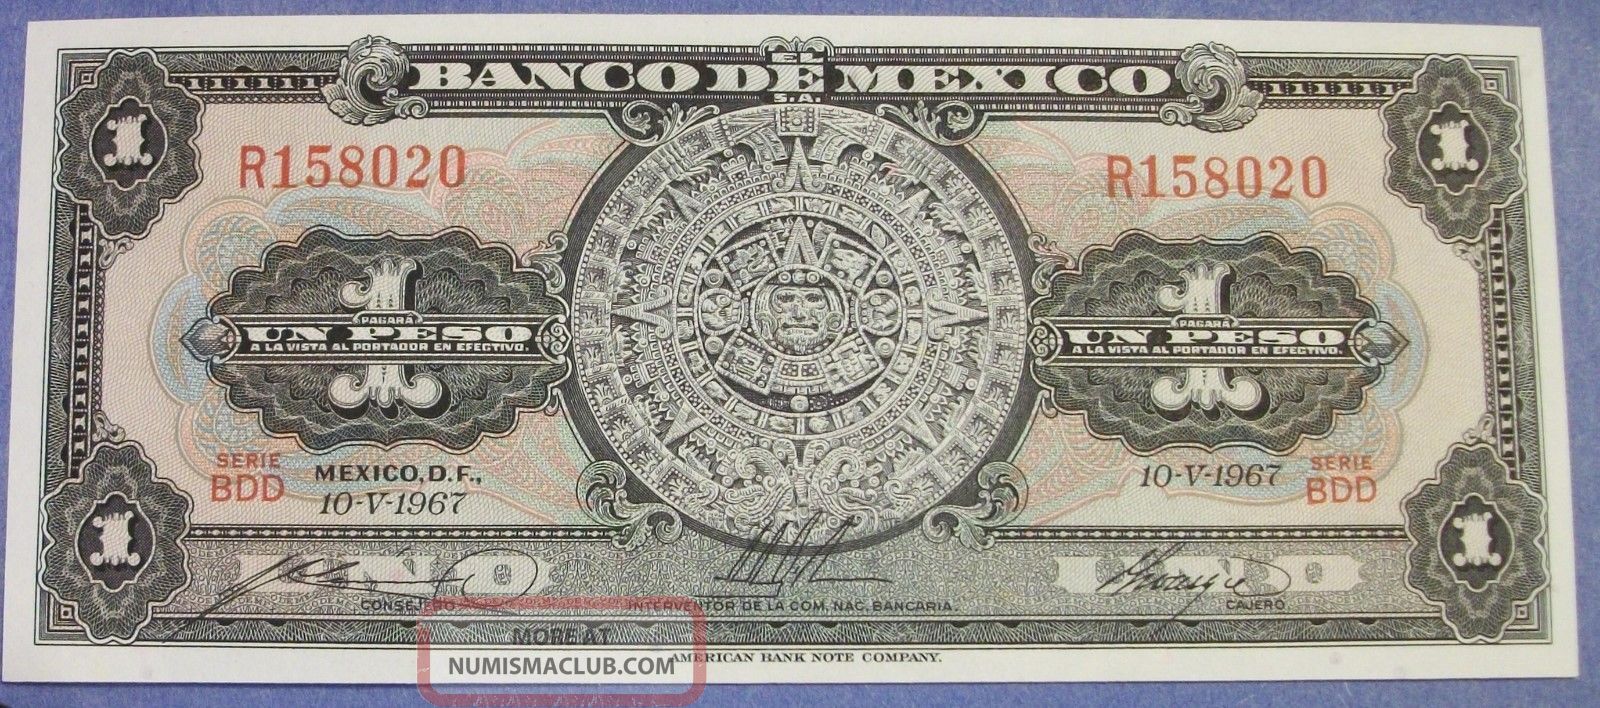 1967 One Peso Note Bank Of Mexico Series Bdd, Unc.